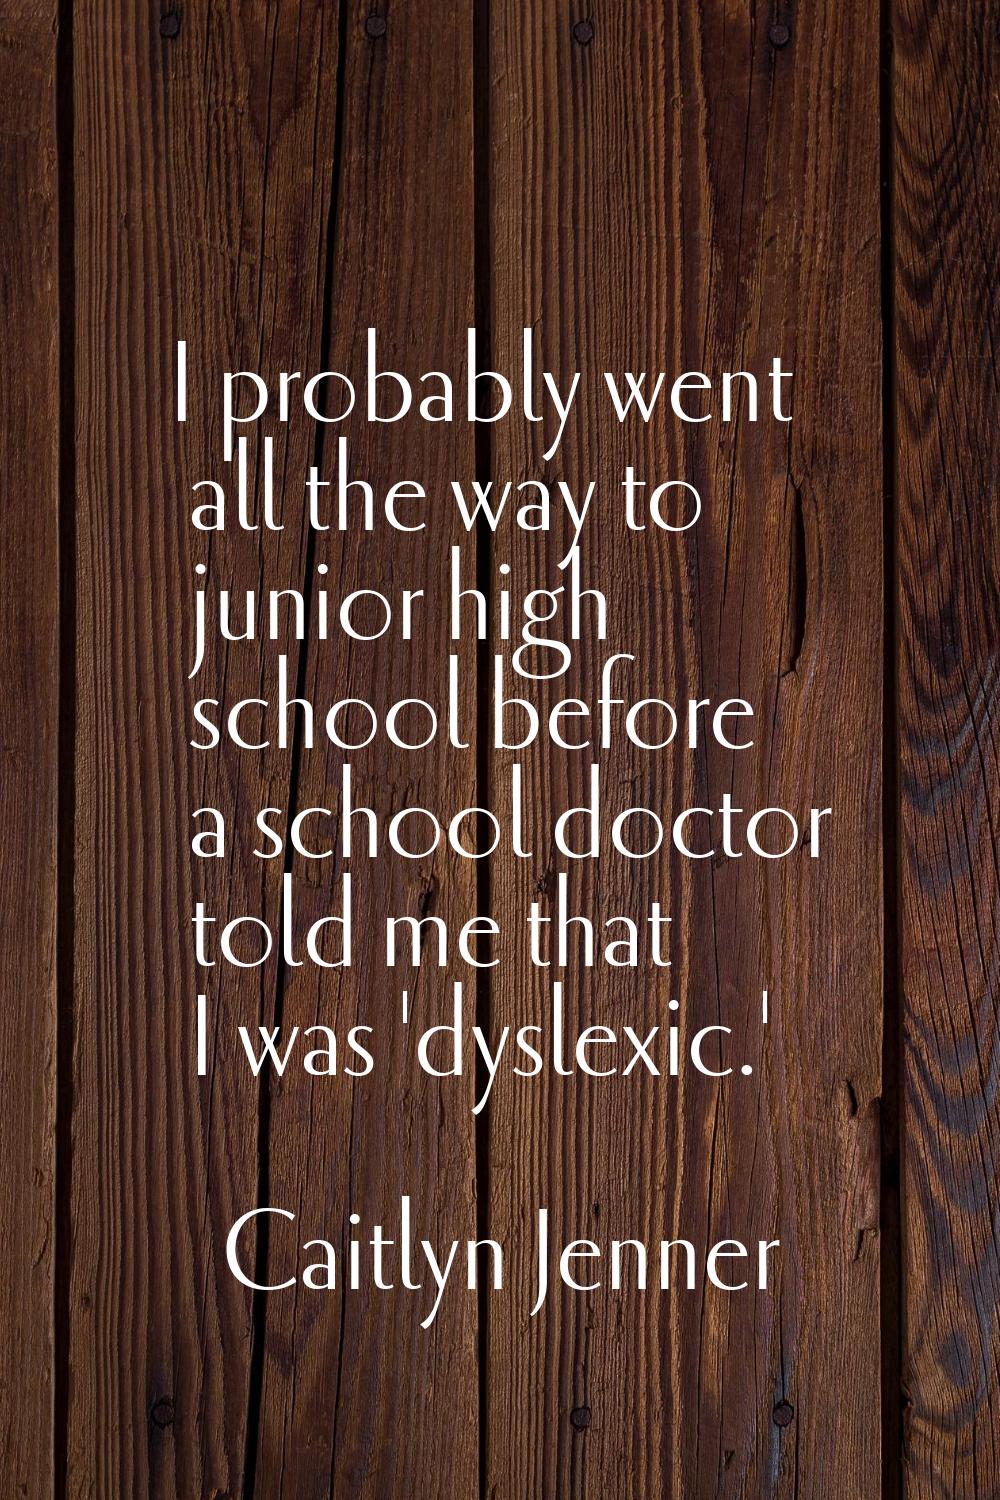 I probably went all the way to junior high school before a school doctor told me that I was 'dyslex